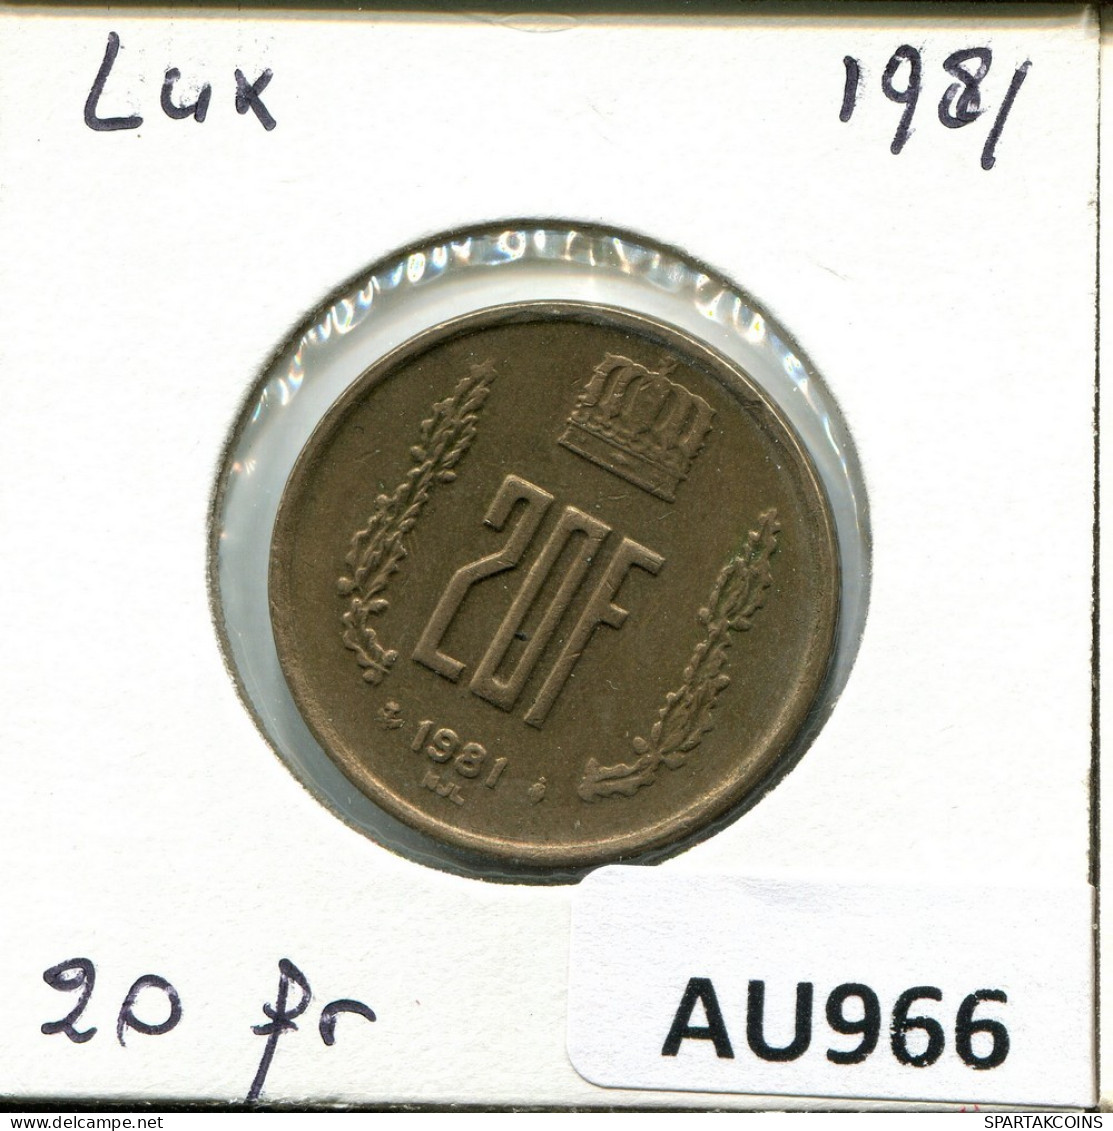 20 FRANCS 1981 LUXEMBOURG Coin #AU966.U.A - Luxemburgo